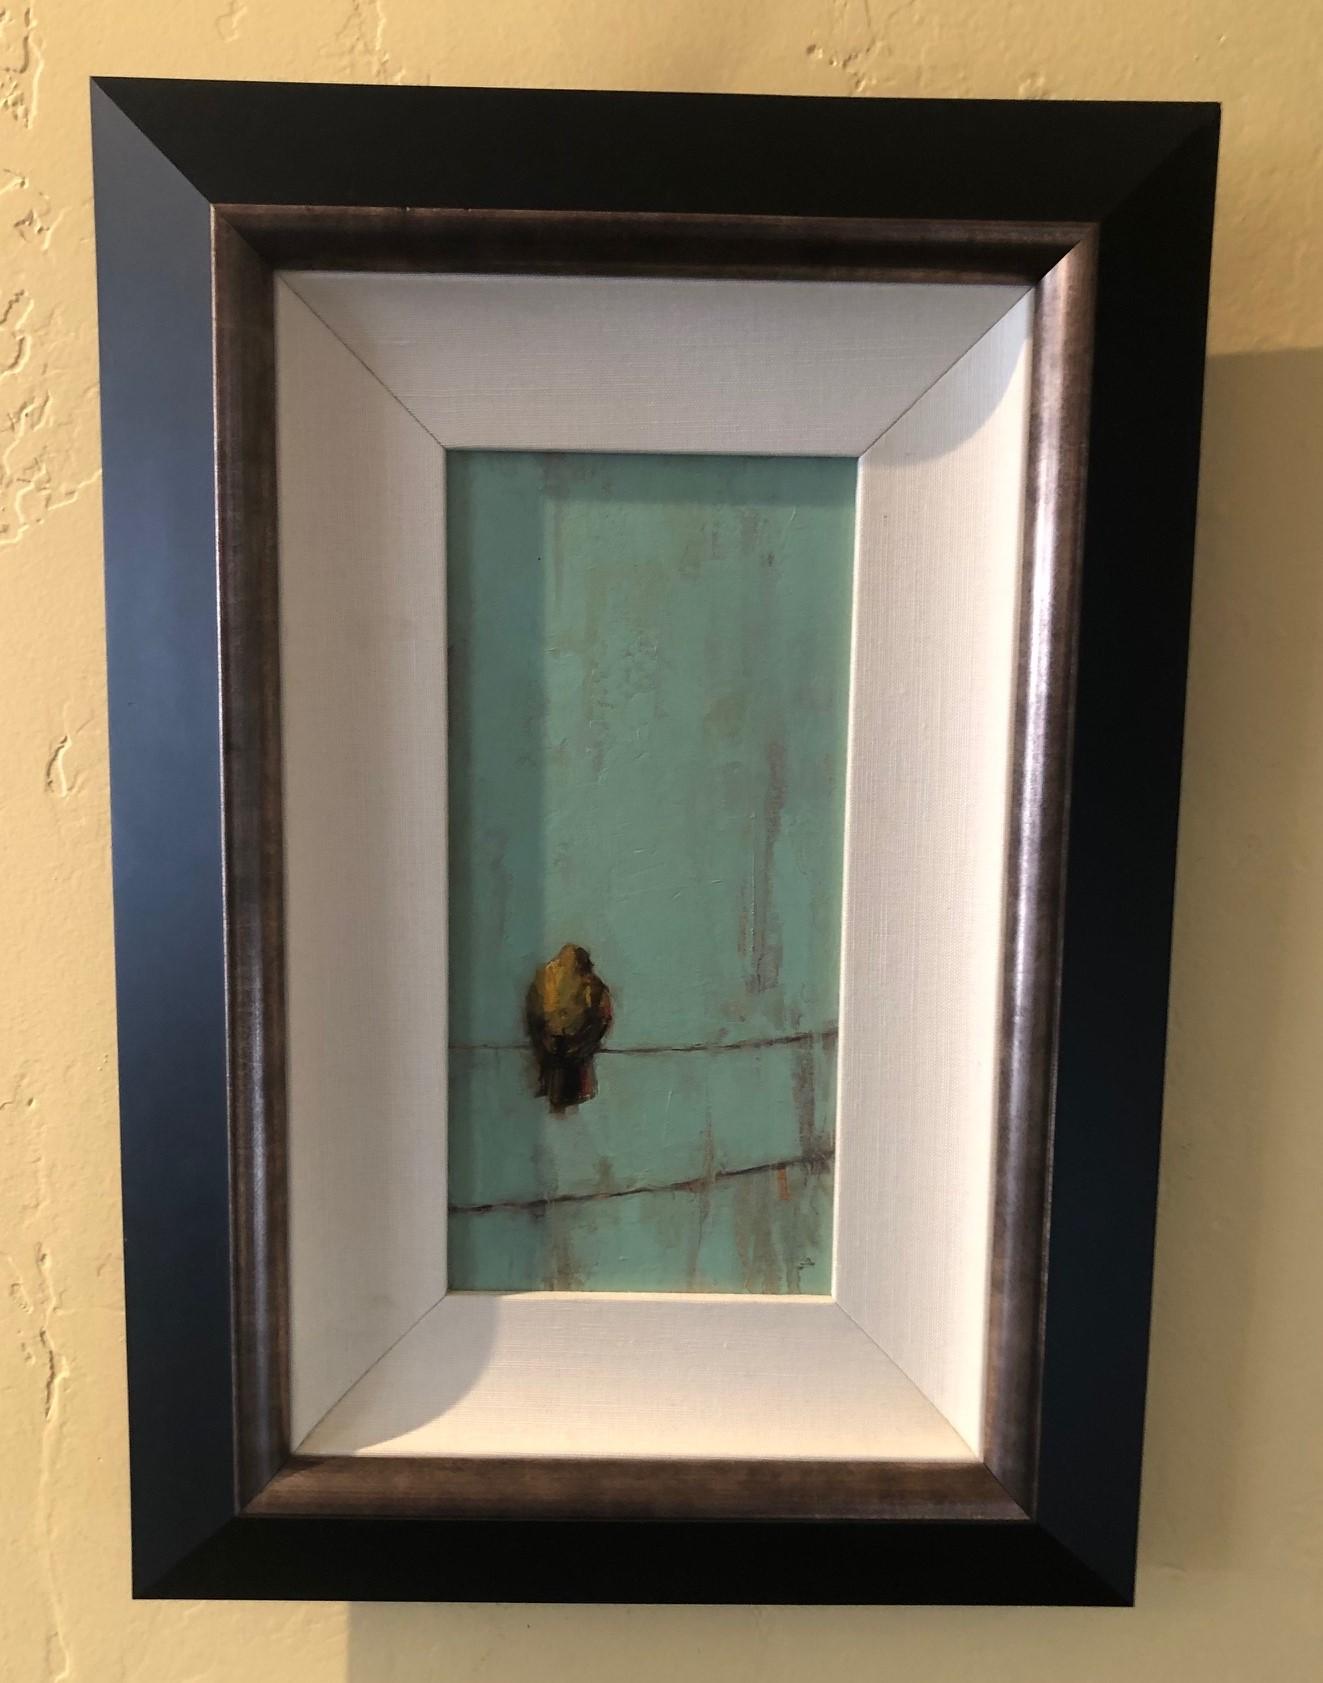 Original oil on canvas painting by American artist Angie Renfro, circa 2010s. The piece is custom framed and is mounted on a cream linen mat with a two-tone dark brown and gray frame. The painting is 6